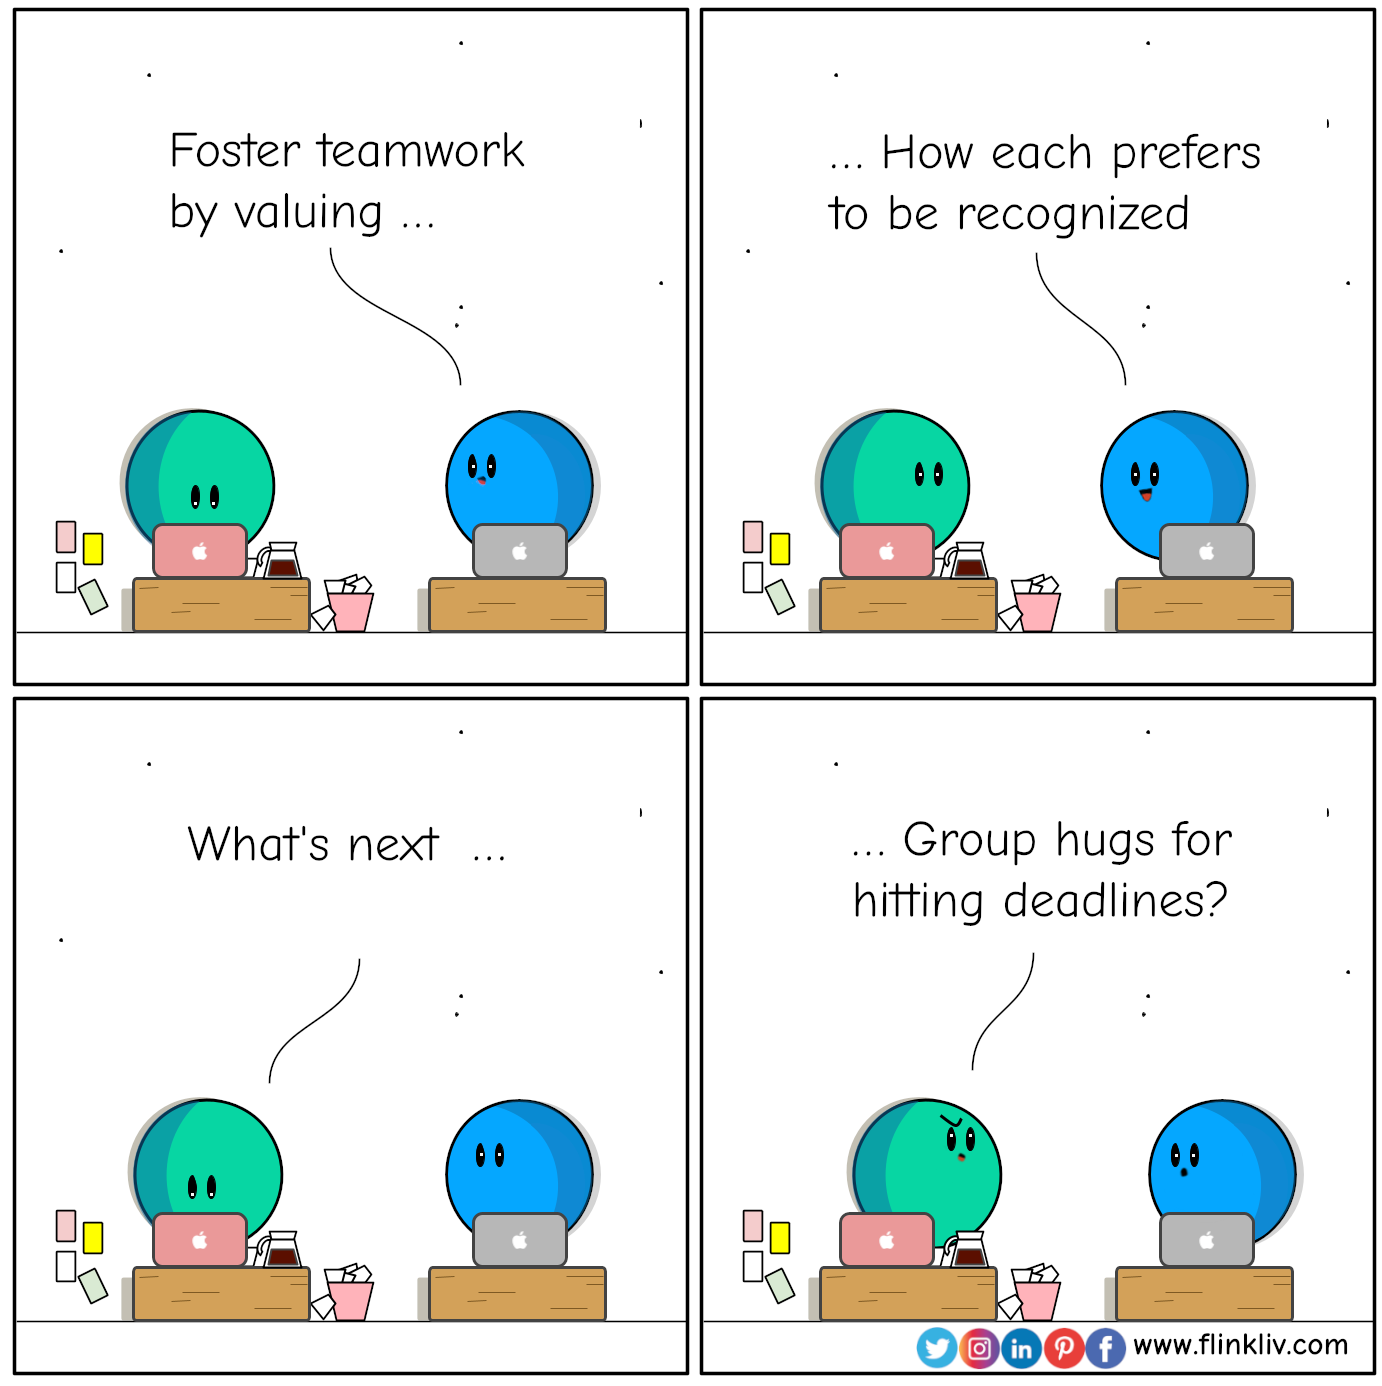 Conversation between A and B about value others for better team work.
				B: Foster teamwork by valuing how each prefers to be recognized.
				A: What's next, group hugs for hitting deadlines?
				By Flinkliv.com
            